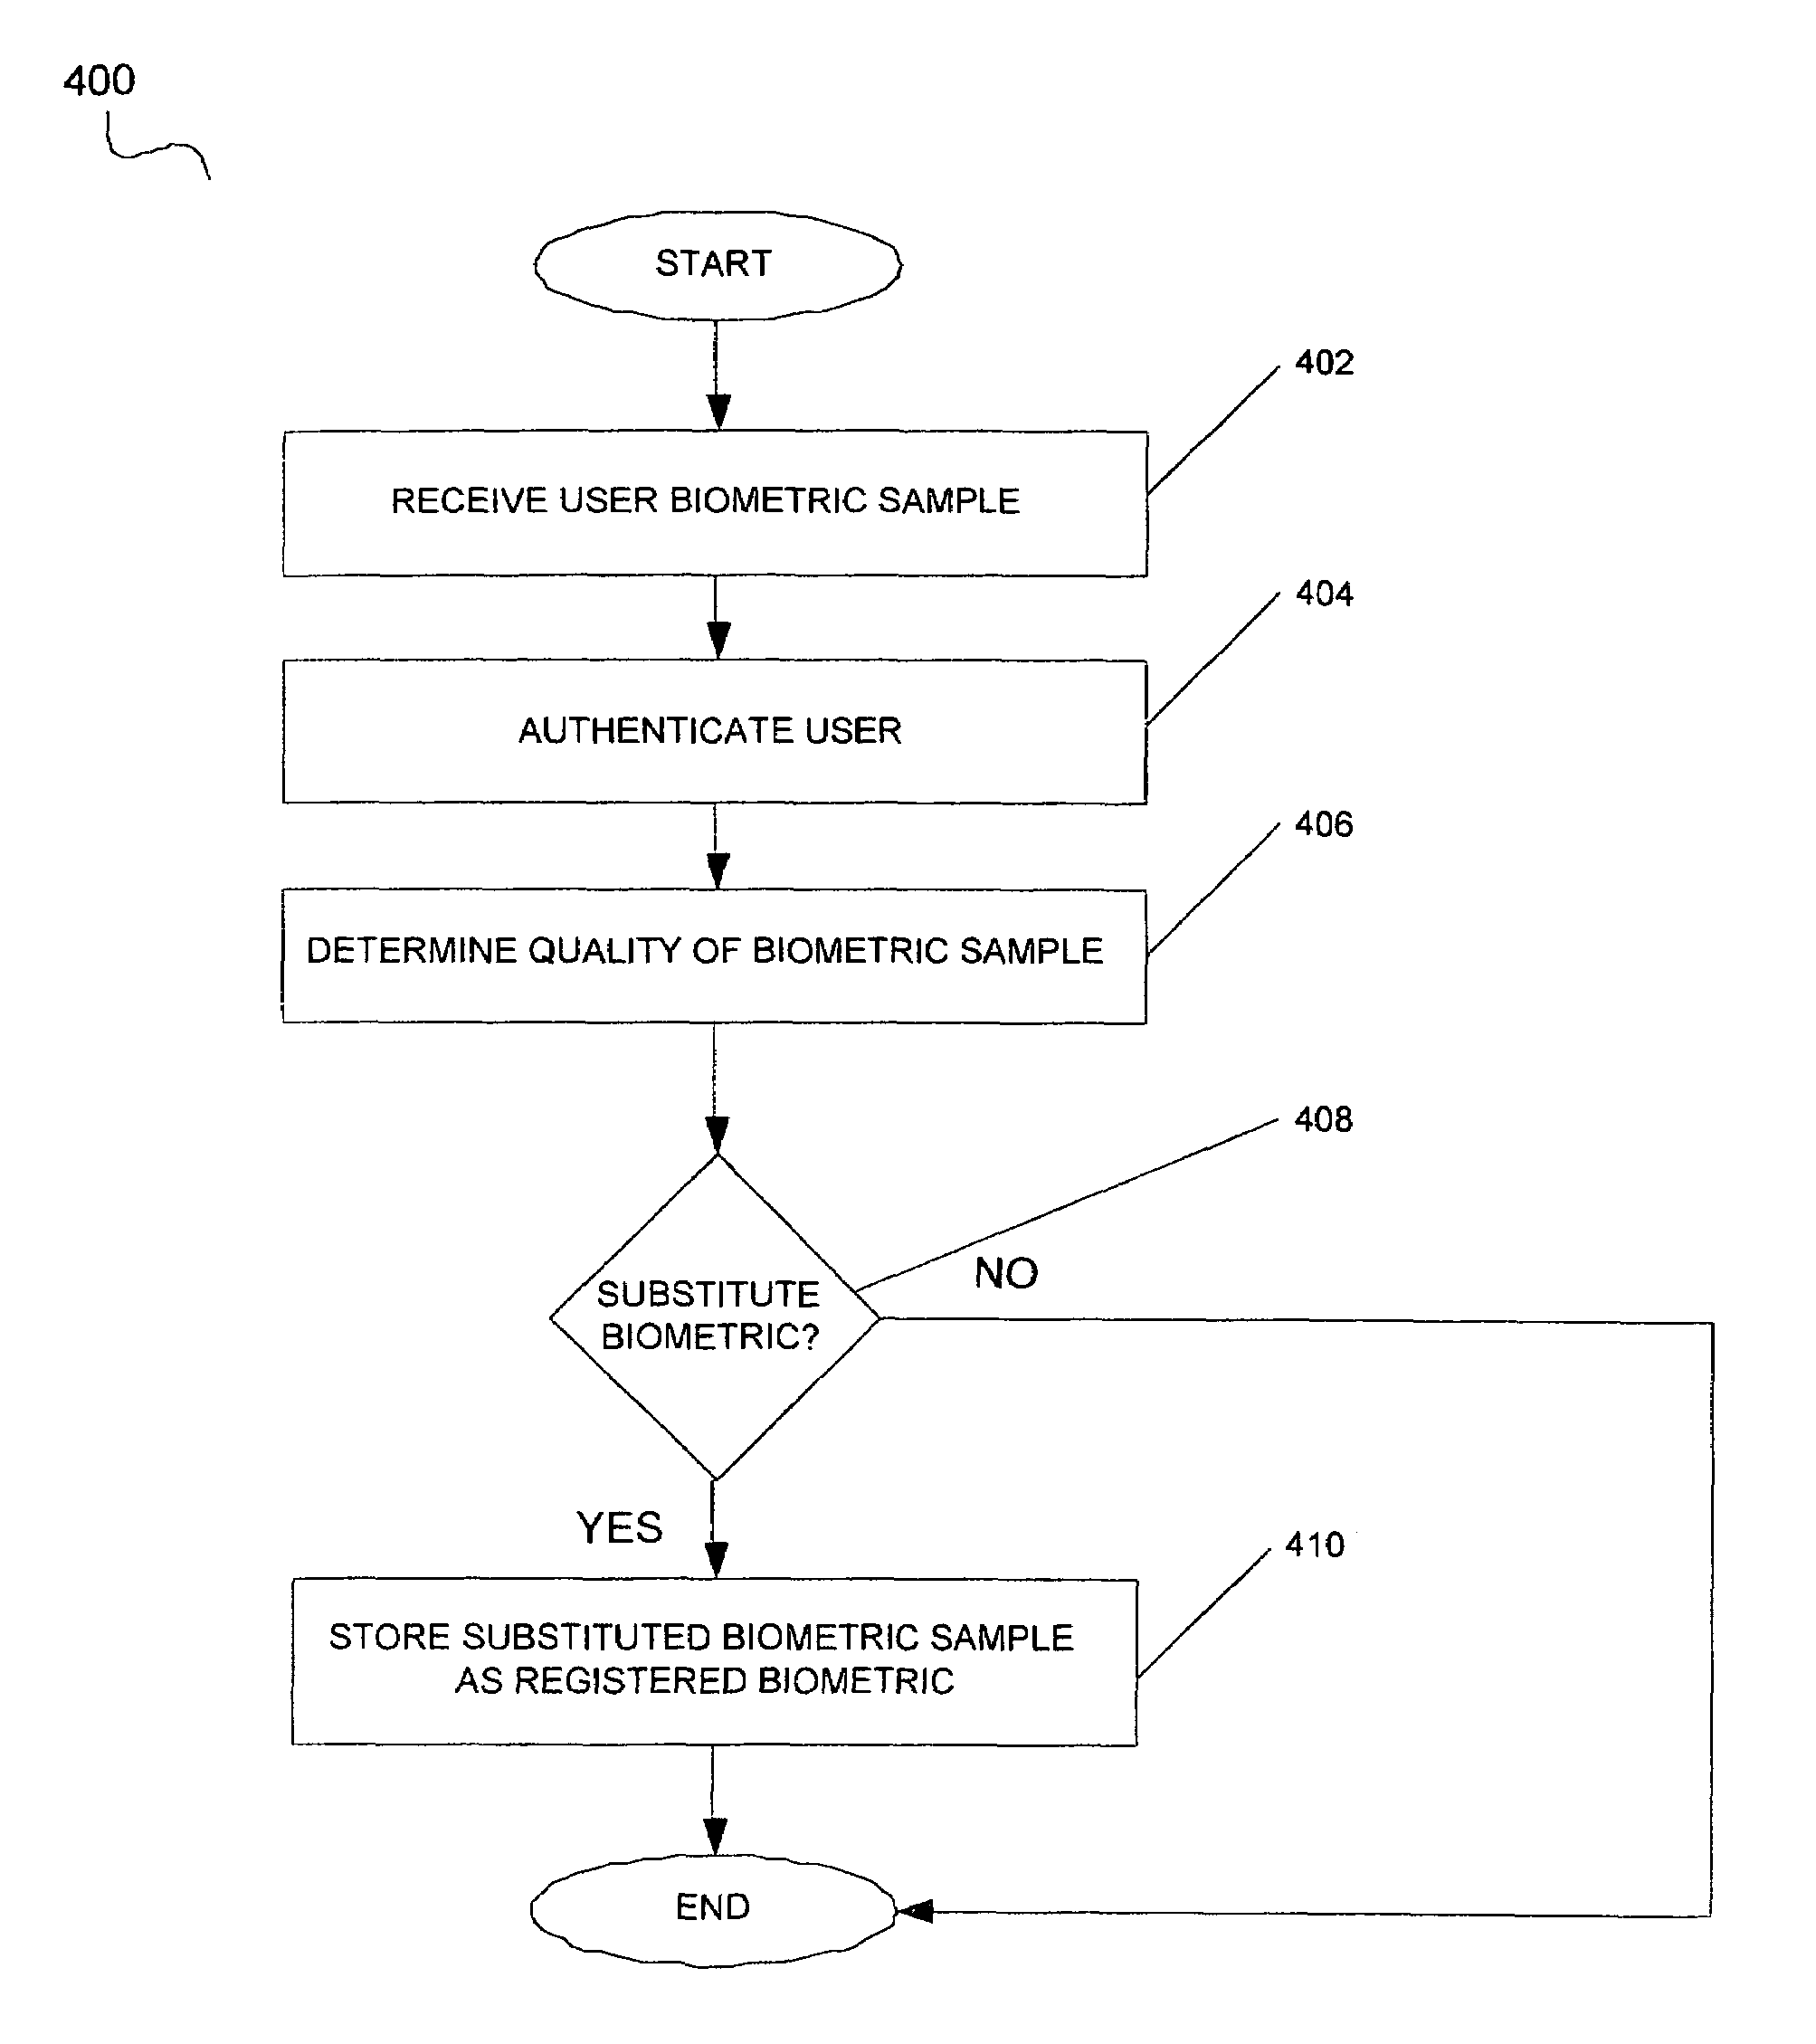 System and method for upgrading biometric data